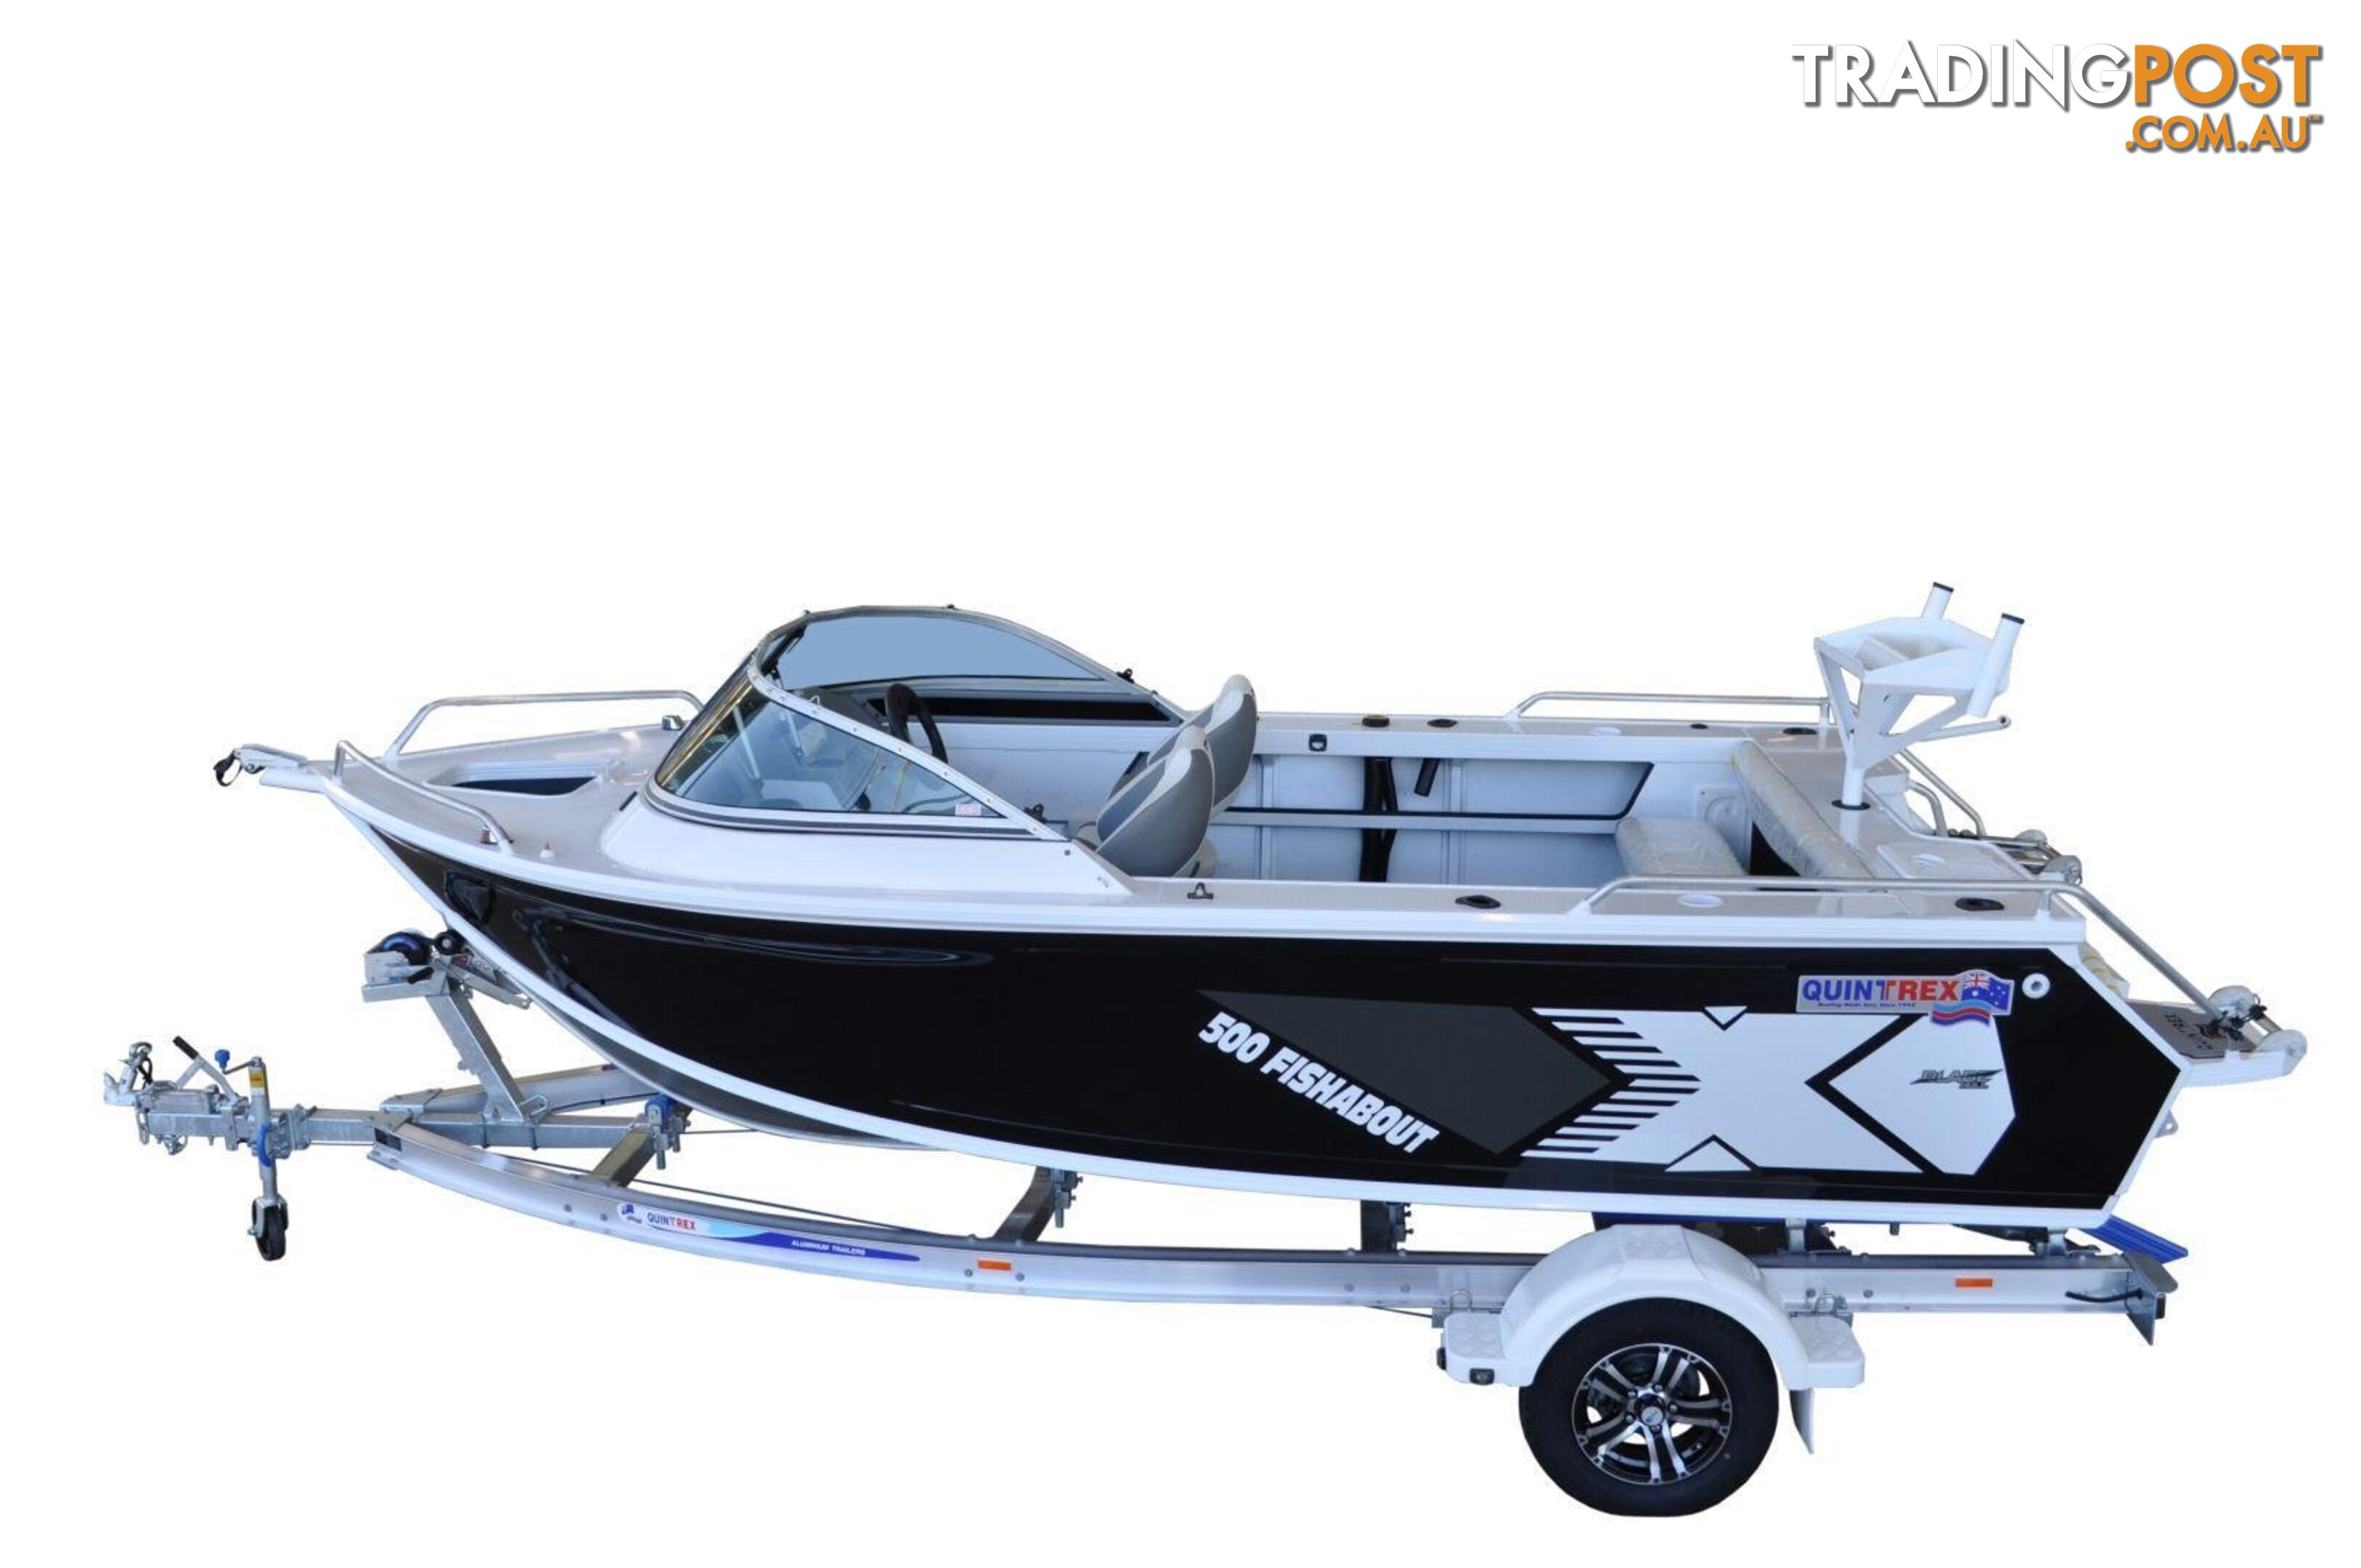 Quintrex 500 Fishabout + Yamaha F75HP 4-Stroke - Pack 1 for sale online prices